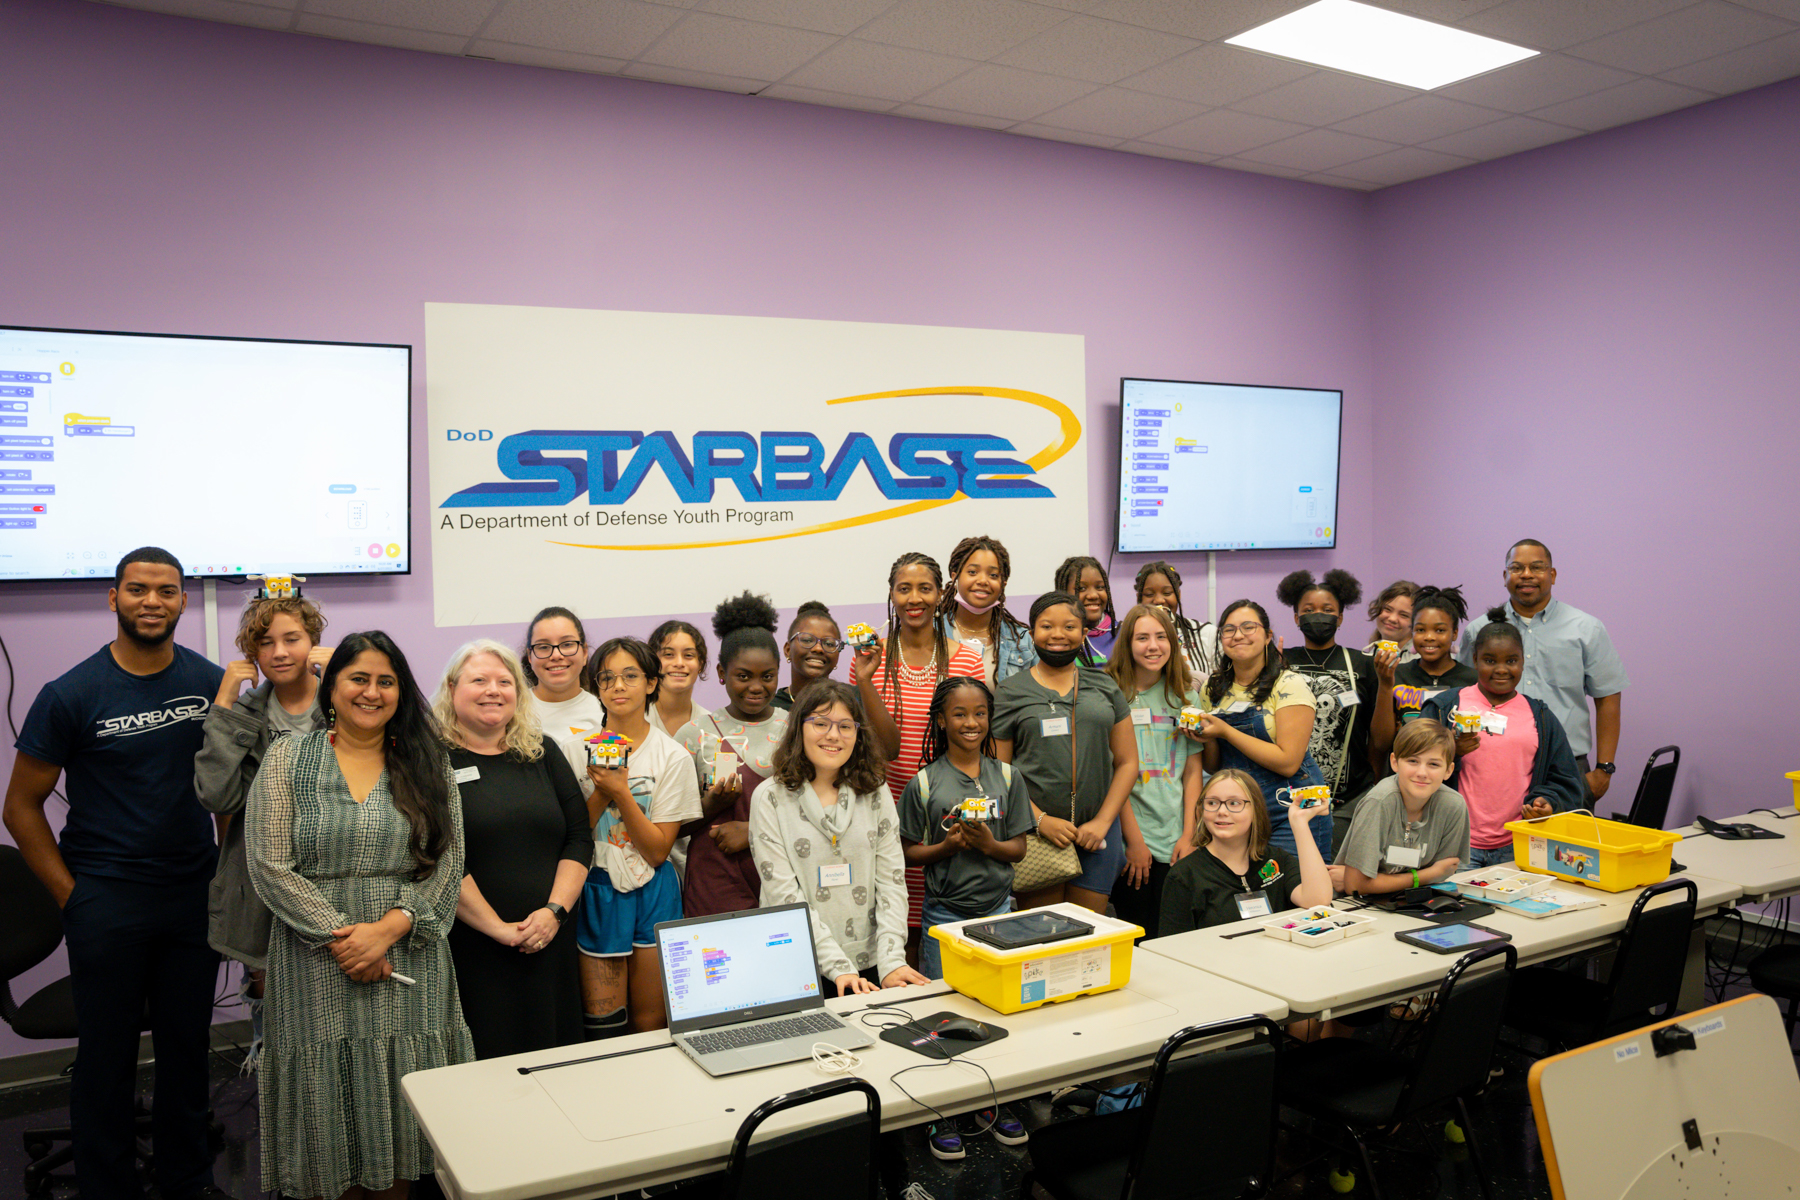 A group of middle school students and a few adults stand in front of a sign that reads: Starbase, a Department of Defense Youth Program